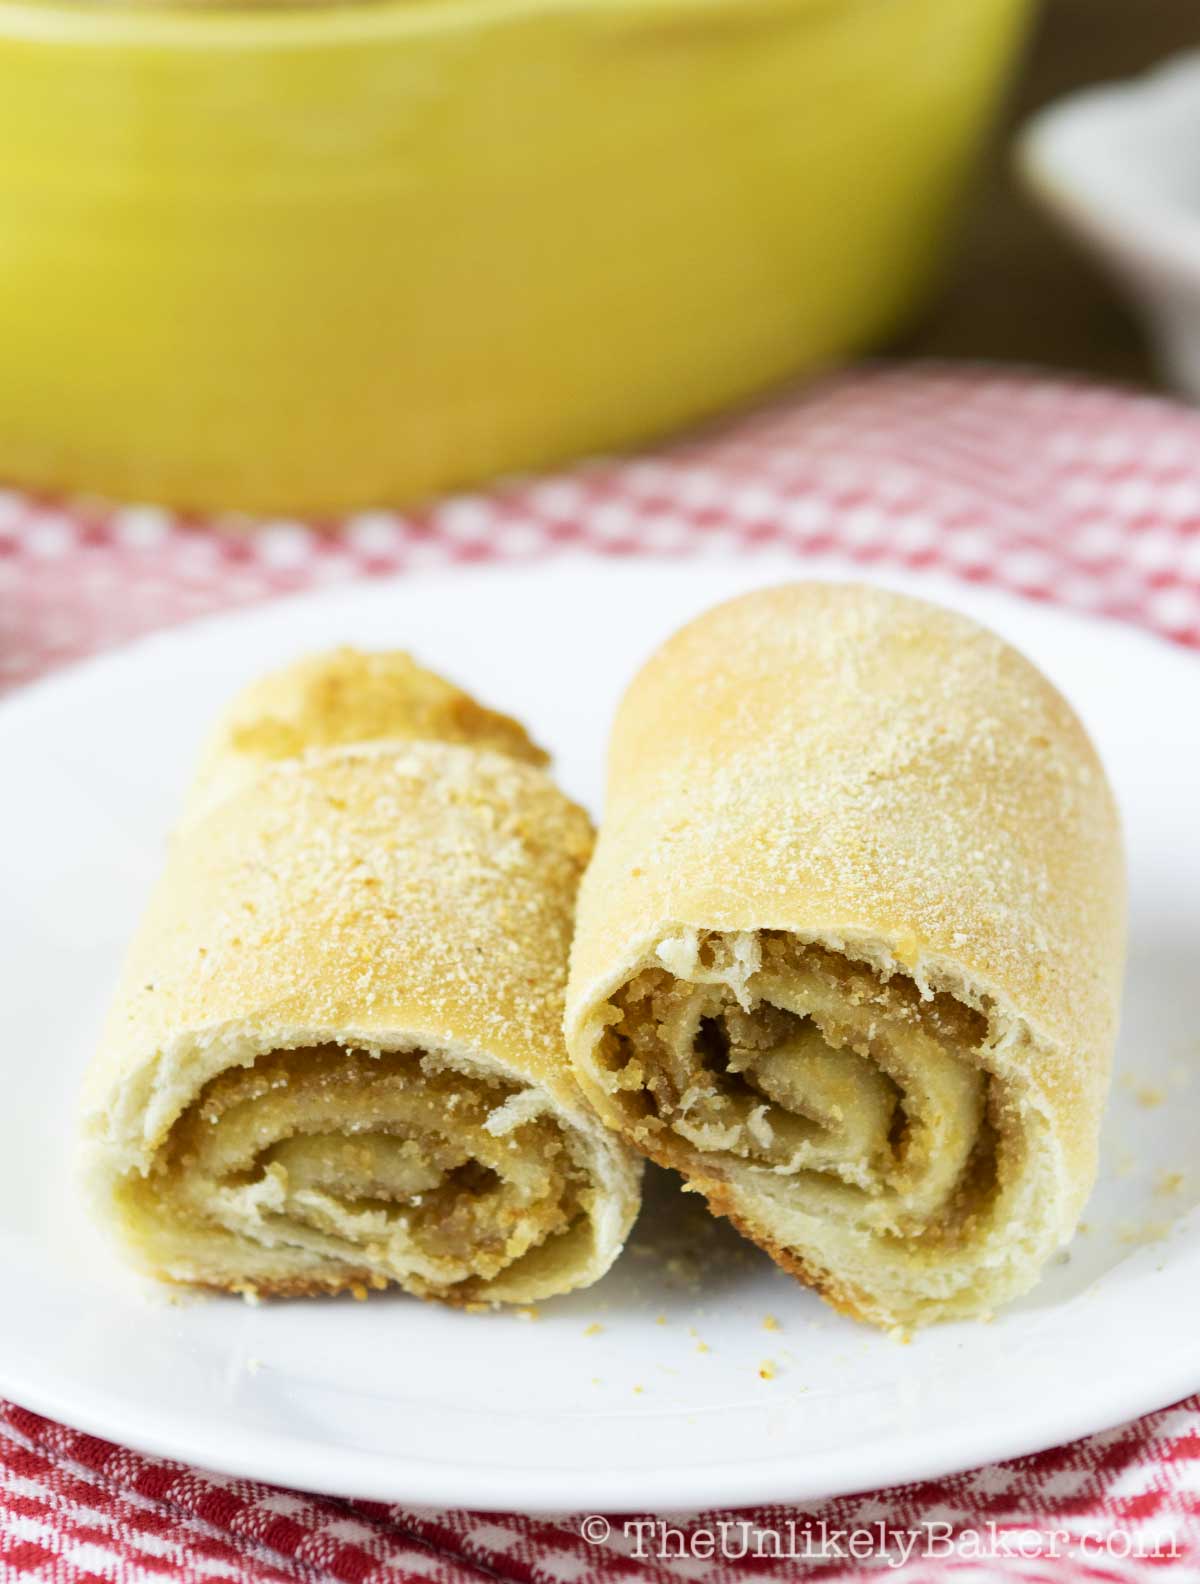 Filipino spanish bread with sweet coconut filling.